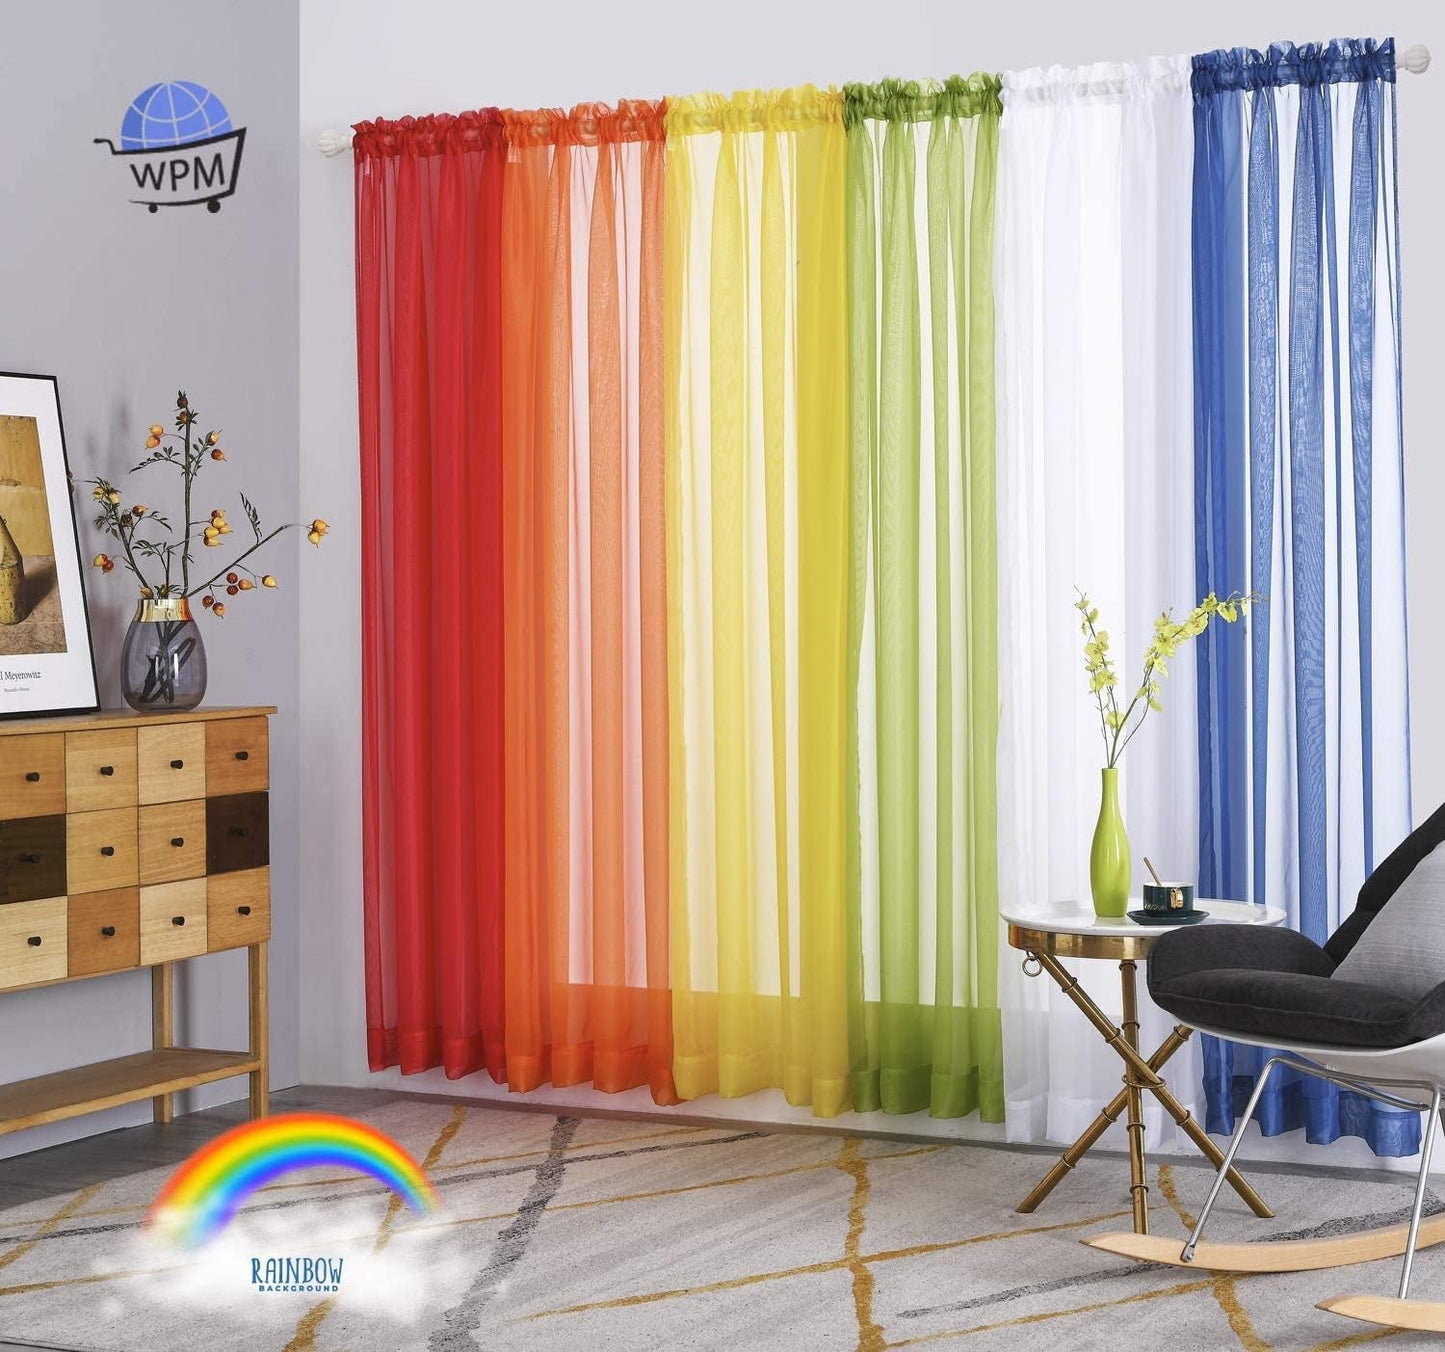 6 Piece Rainbow Sheer Window Panel Colorful Backdrop Bright Curtains Set for Playroom, Nurseries, Bedroom & More Lime, Orange, Red, Purple, Bright Yellow, Navy Drapes- 84 Inch Long Panels